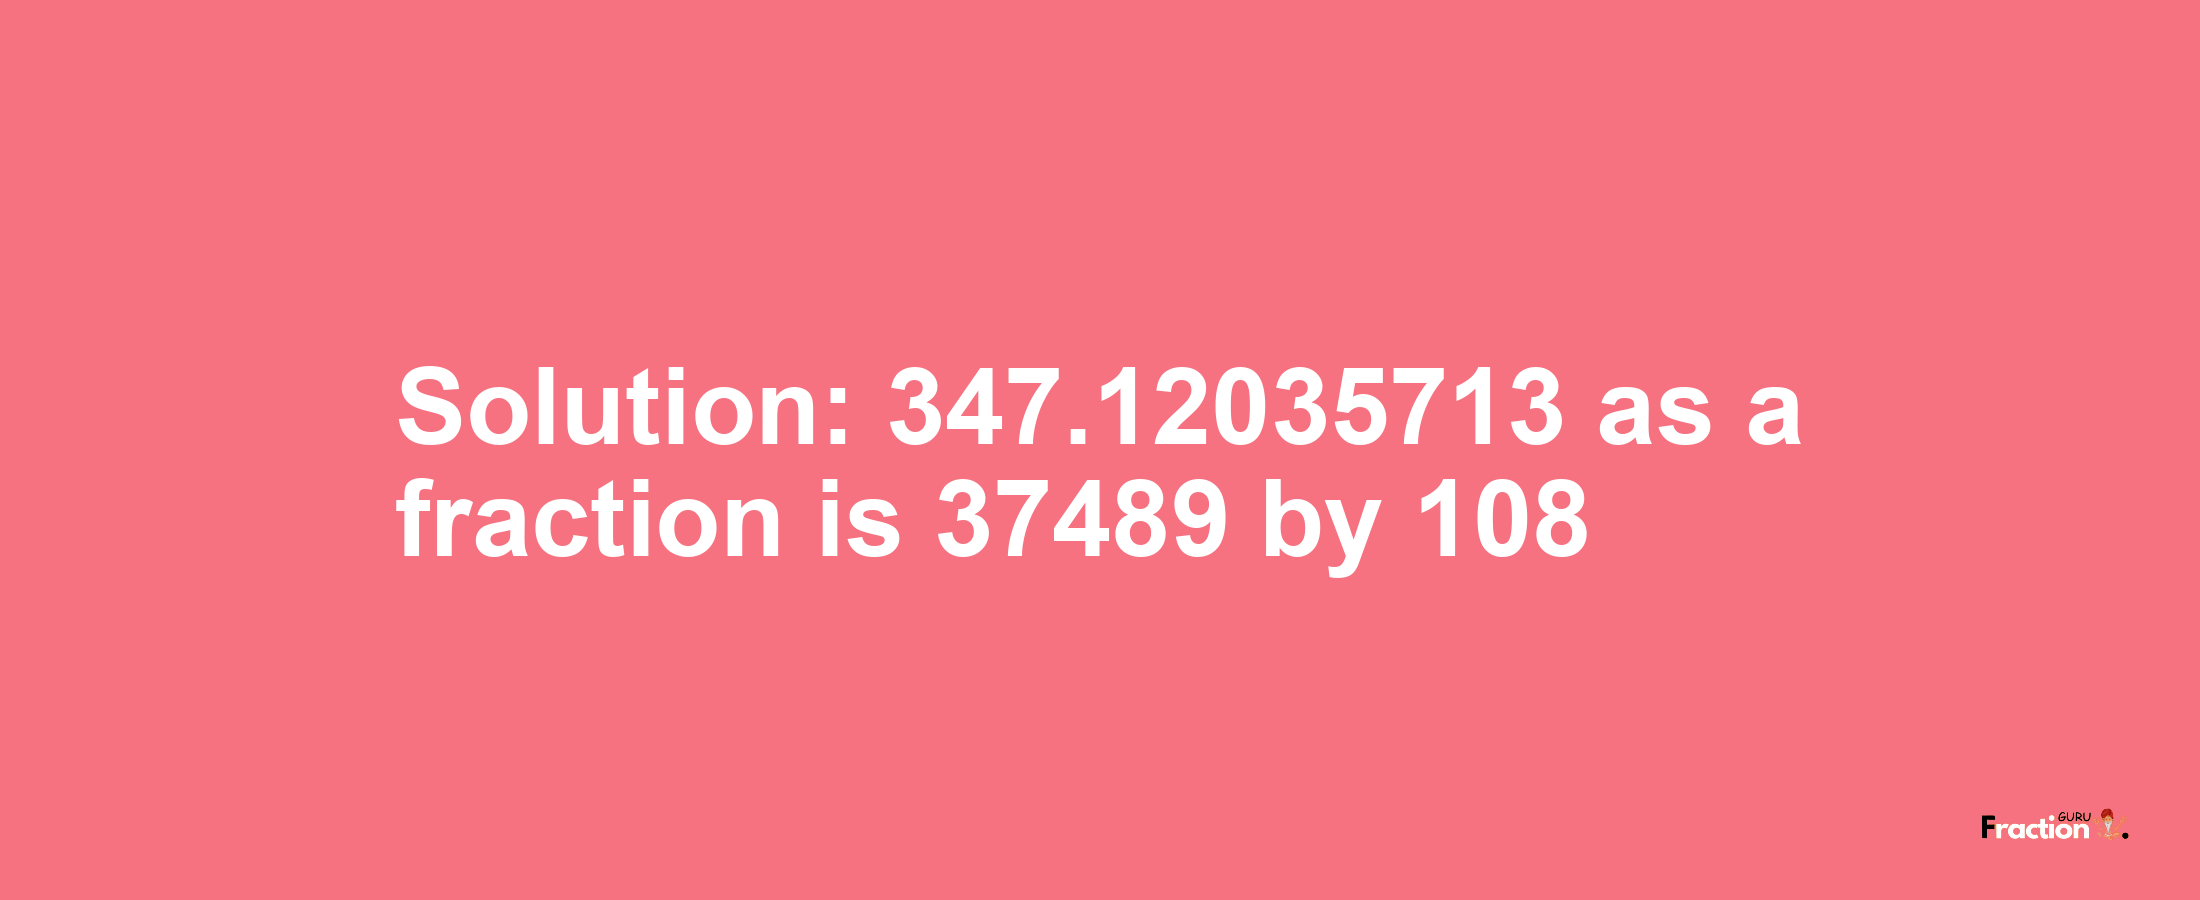 Solution:347.12035713 as a fraction is 37489/108